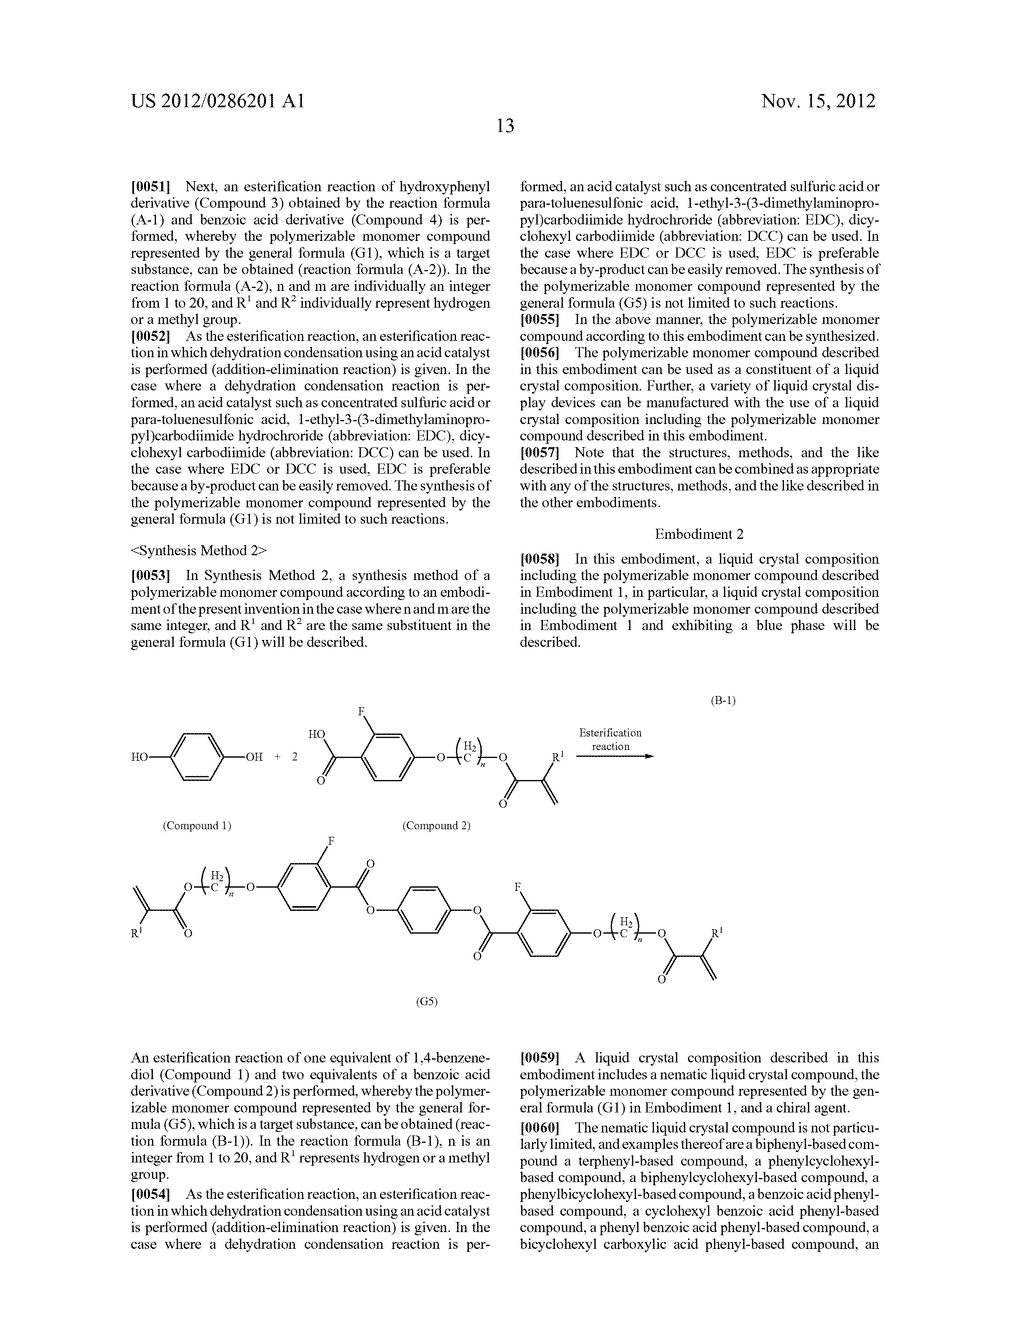 POLYMERIZABLE MONOMER COMPUND, LIQUID CRYSTAL COMPOSITION, AND LIQUID     CRYSTAL DISPLAY DEVICE - diagram, schematic, and image 22